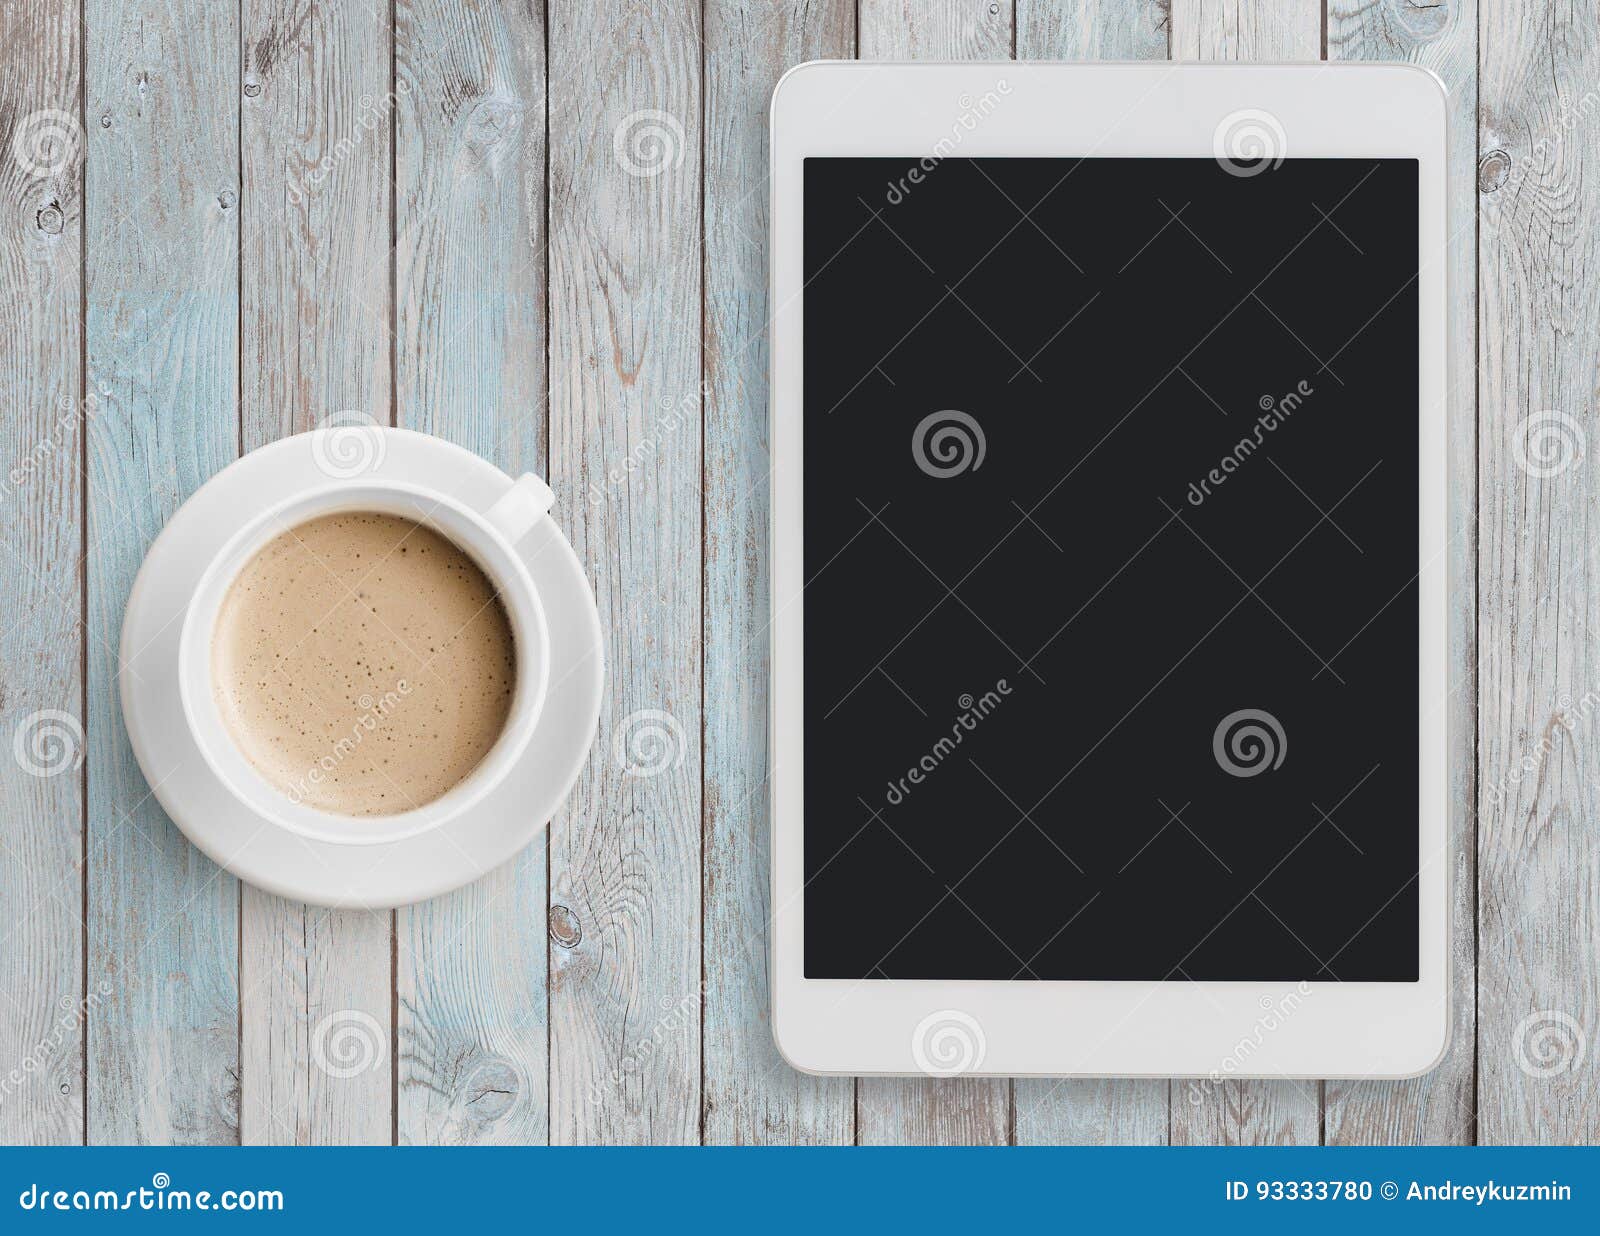 tablet pc looking like ipad on table with coffee cup